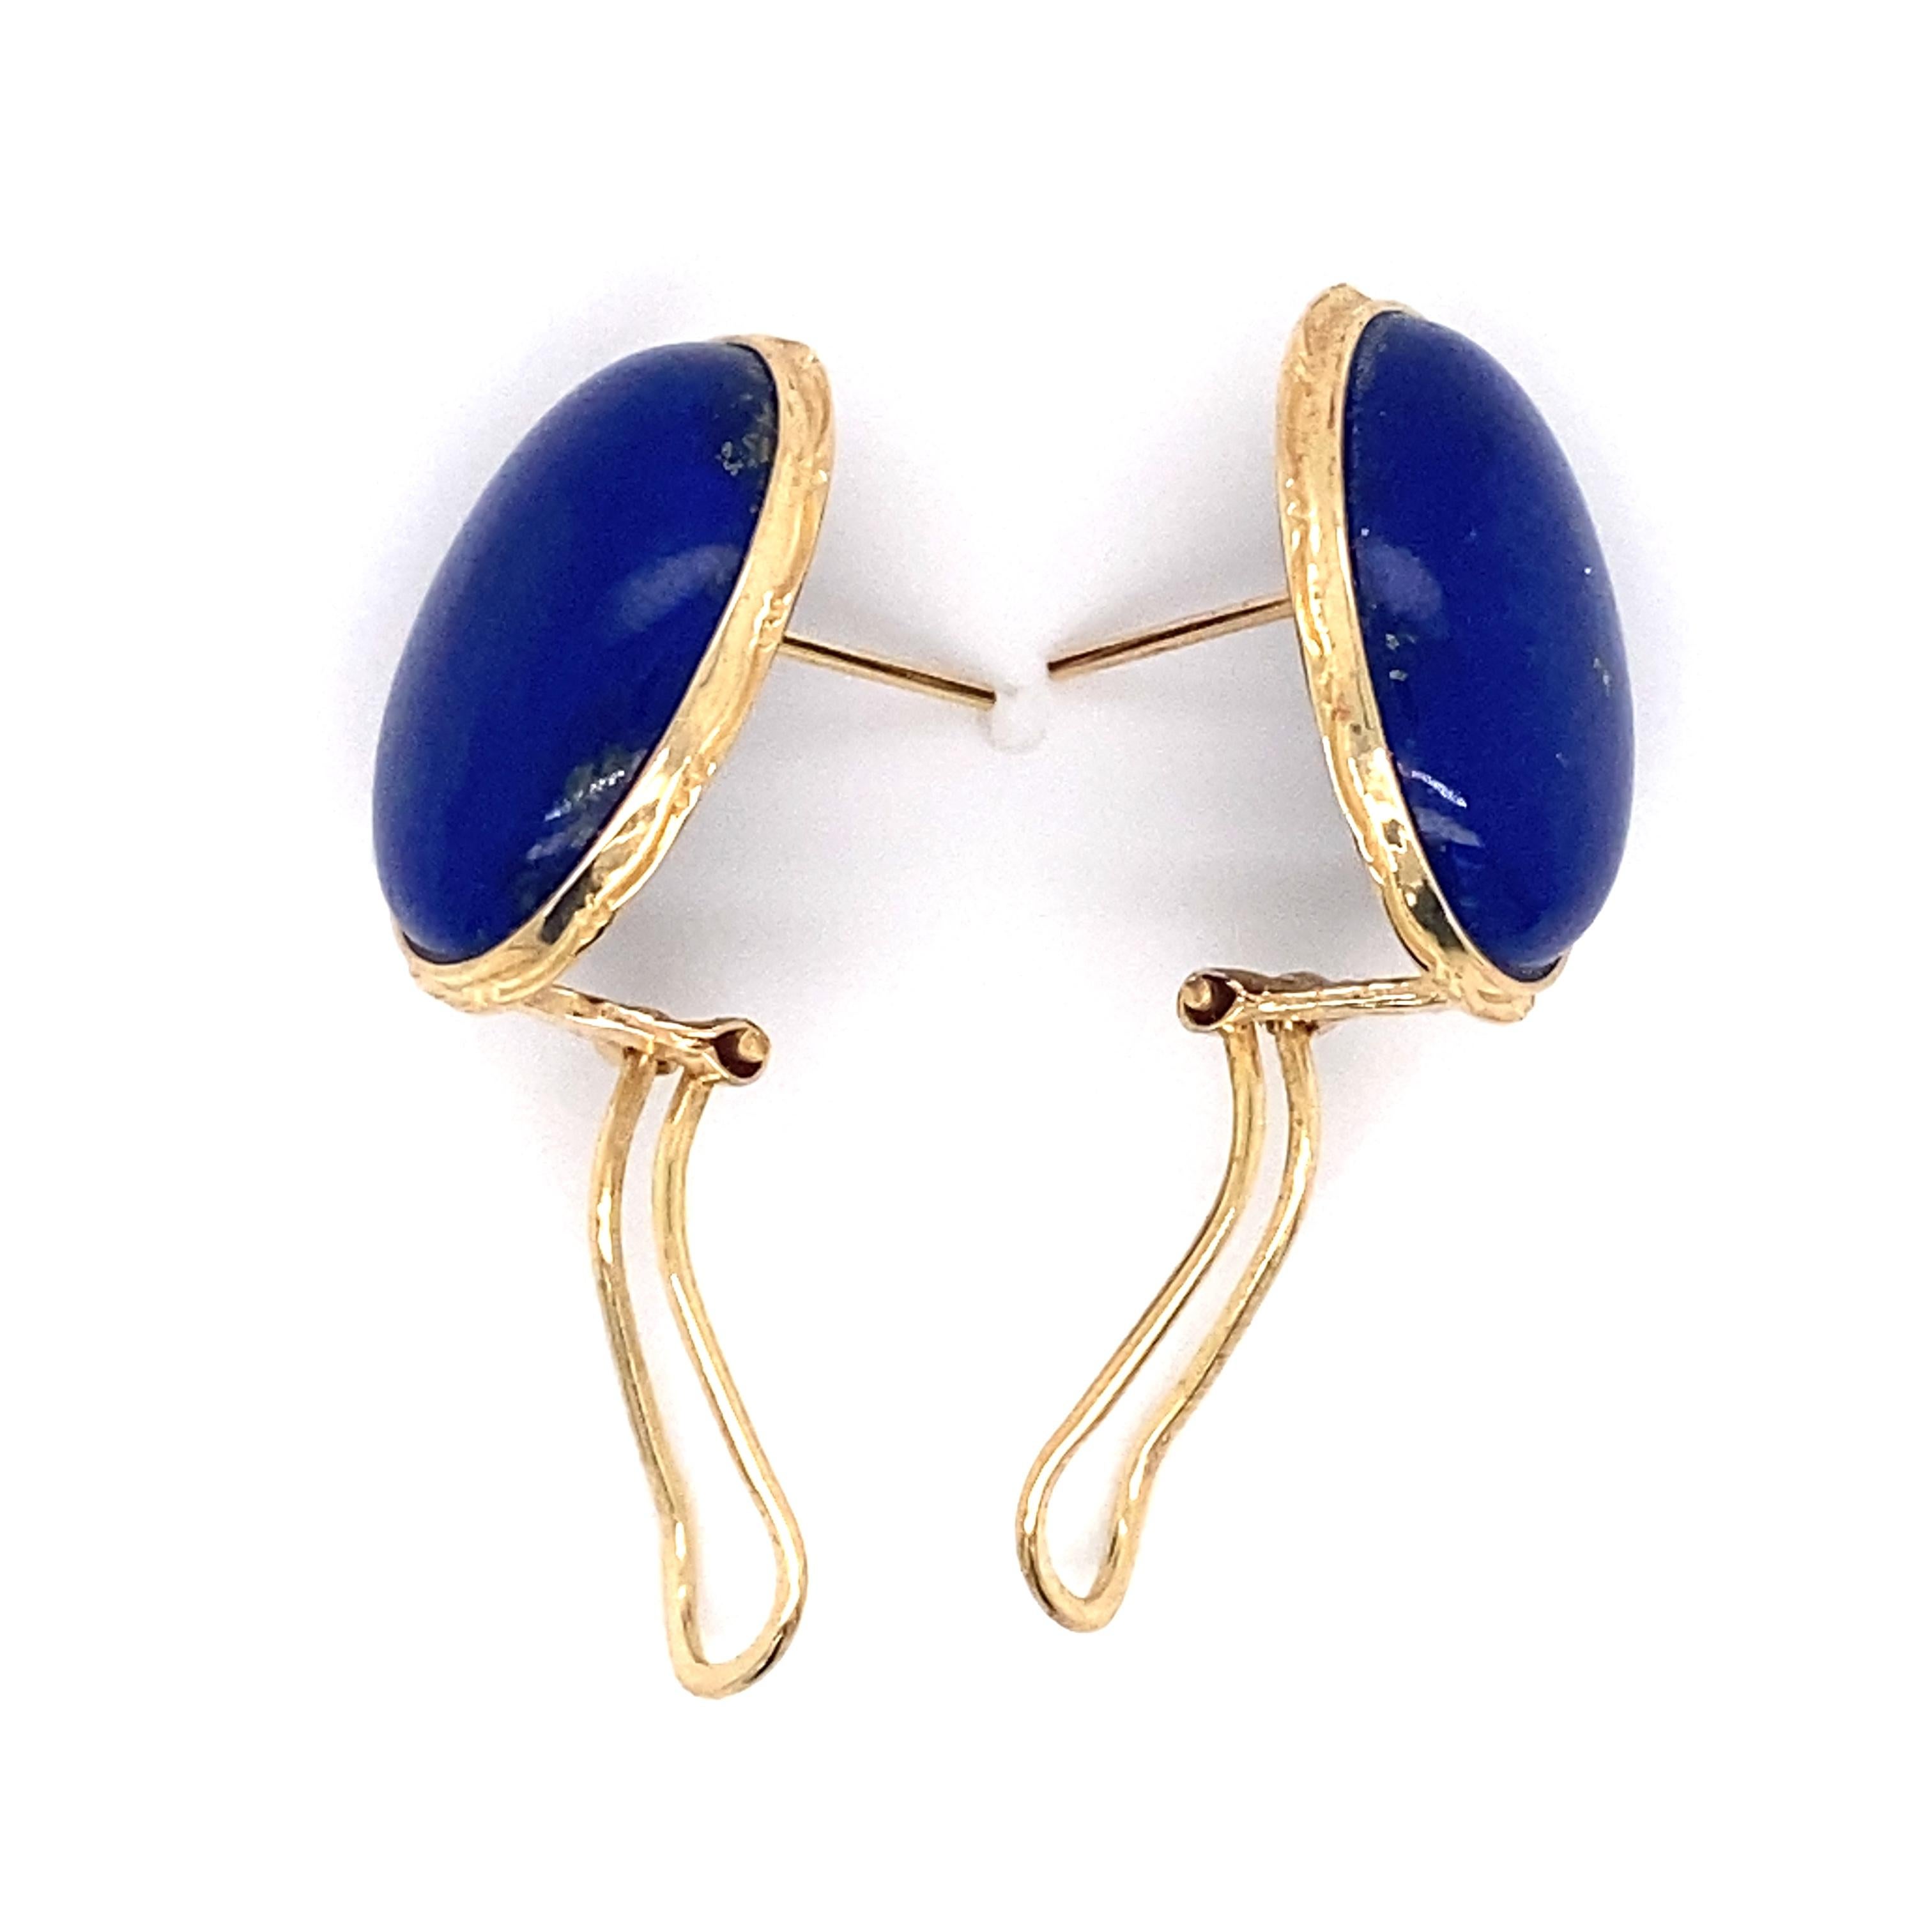 Circa 1940s Polished Lapis Lazuli Cabochon Earrings in 14K Gold 1